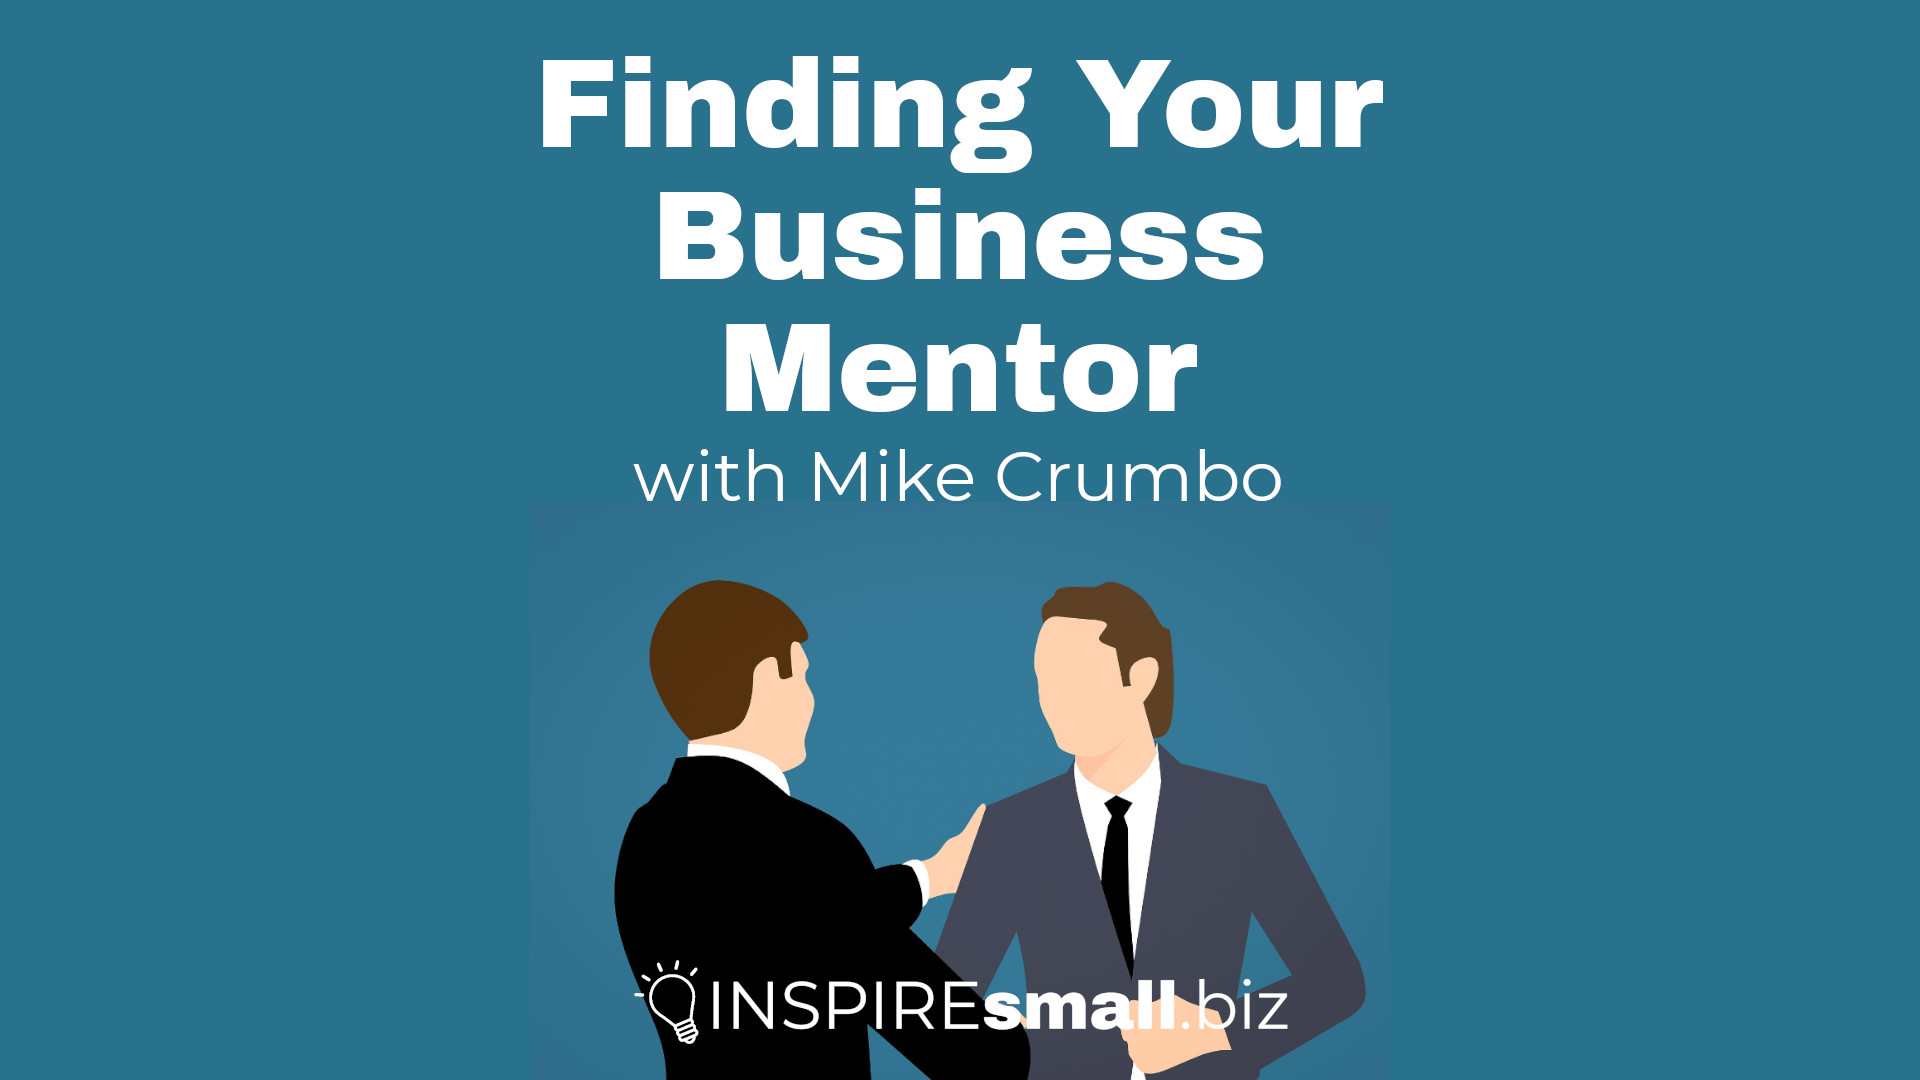 Finding Your Business Mentor with mike Crumbo, white text over a teal background with two stylized business people greeting each other.